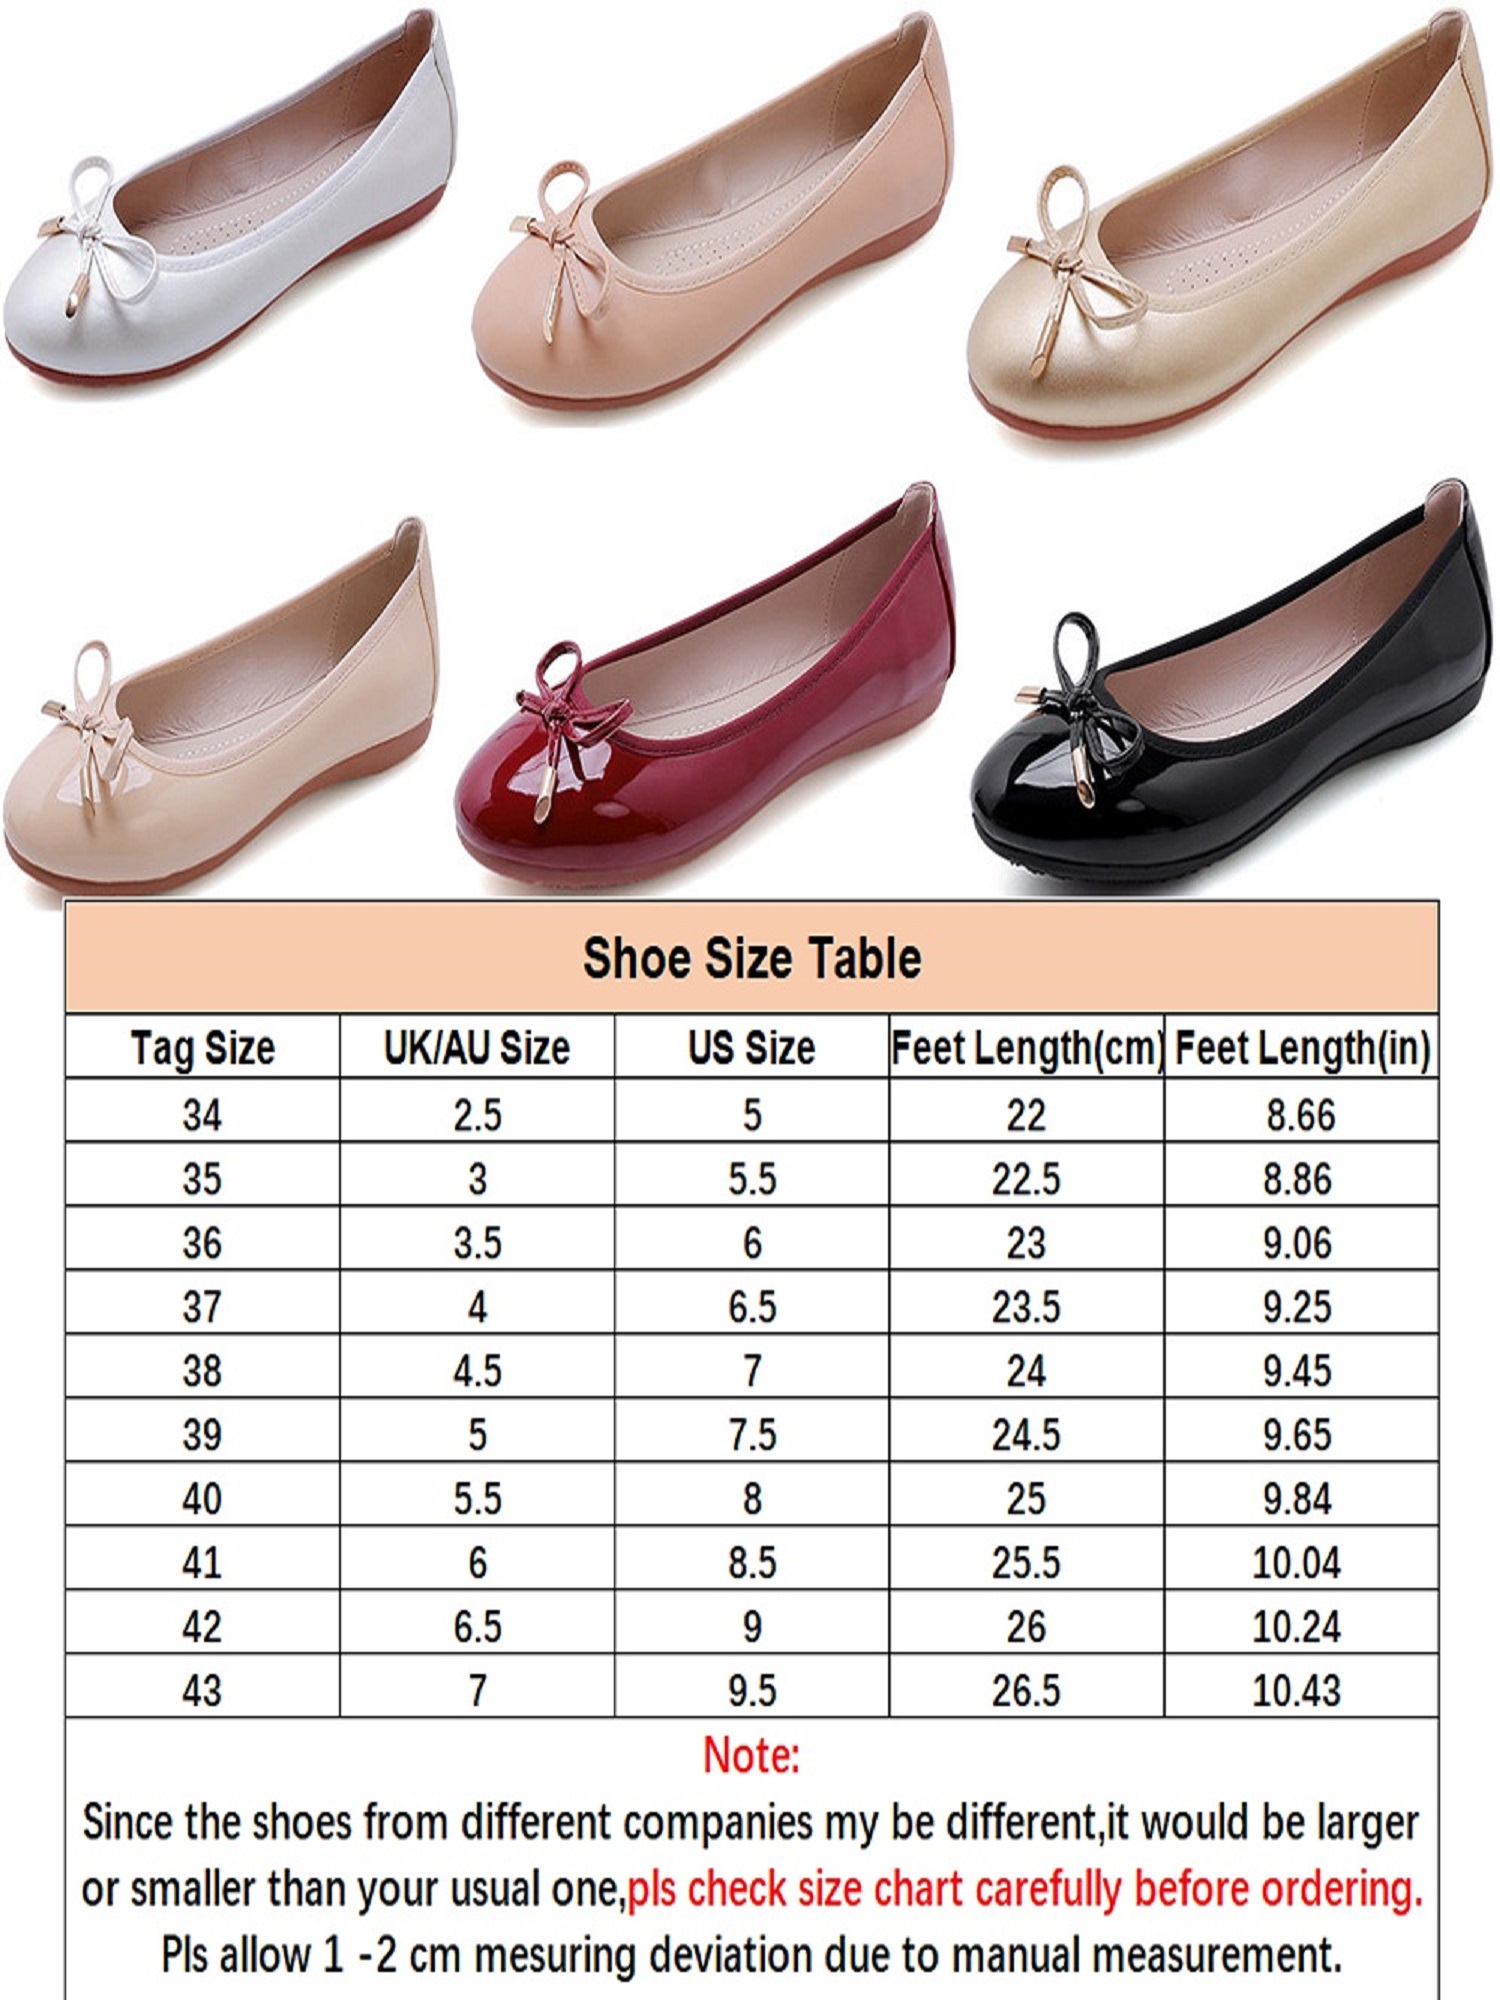 Avamo Ballet Flat womens Shoes Casual Shoes - image 2 of 3